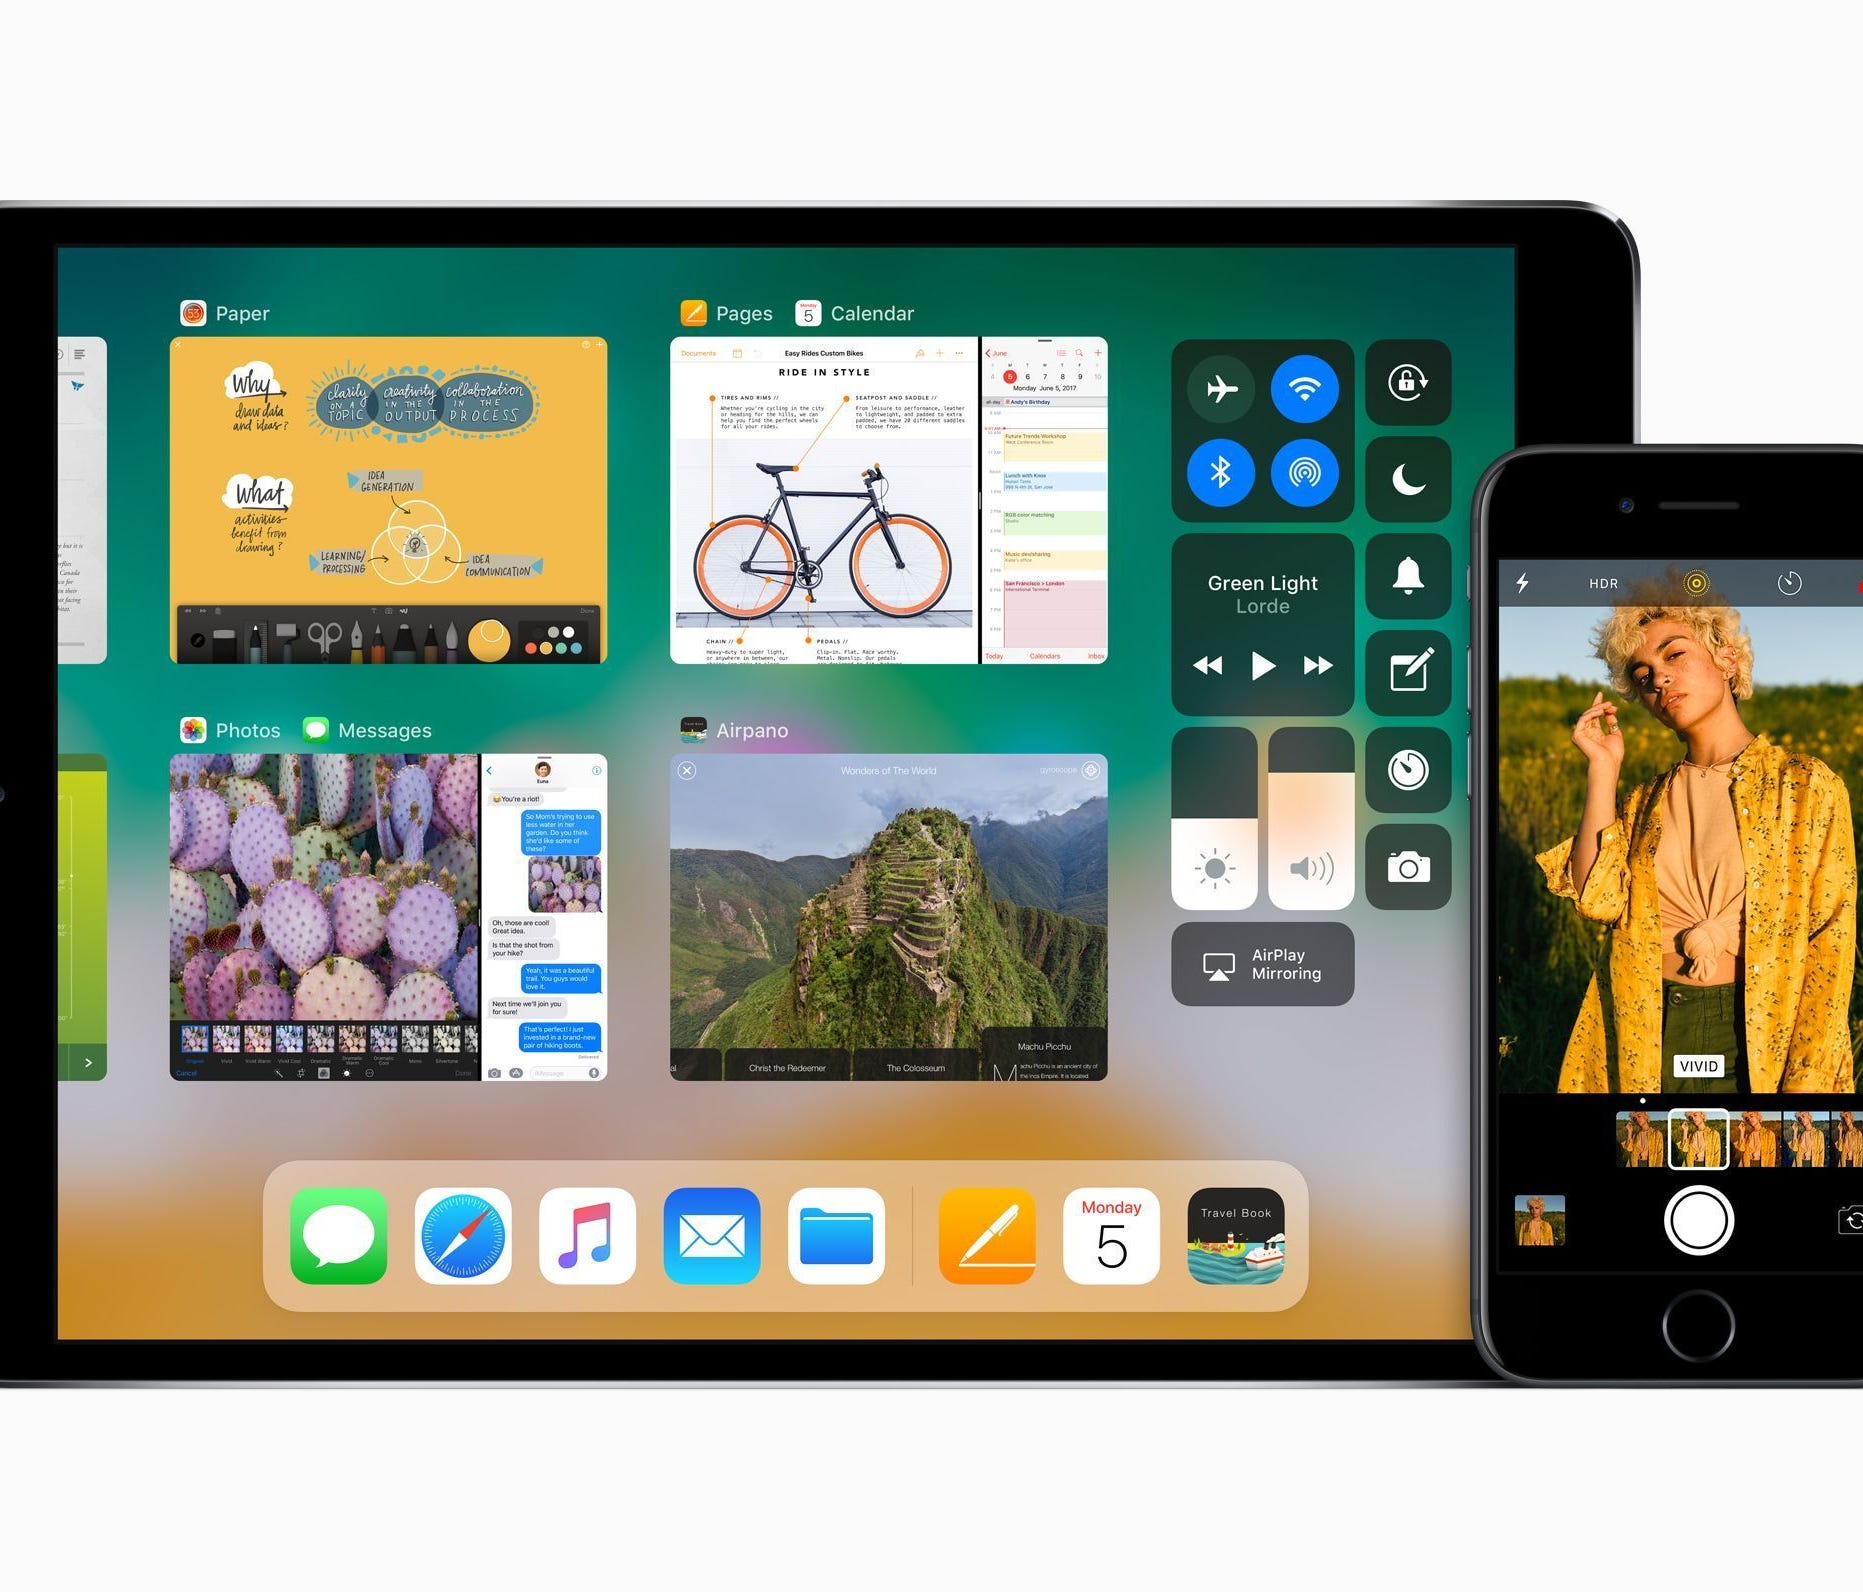 iOS 11 brings changes to the iPad and the iPhone